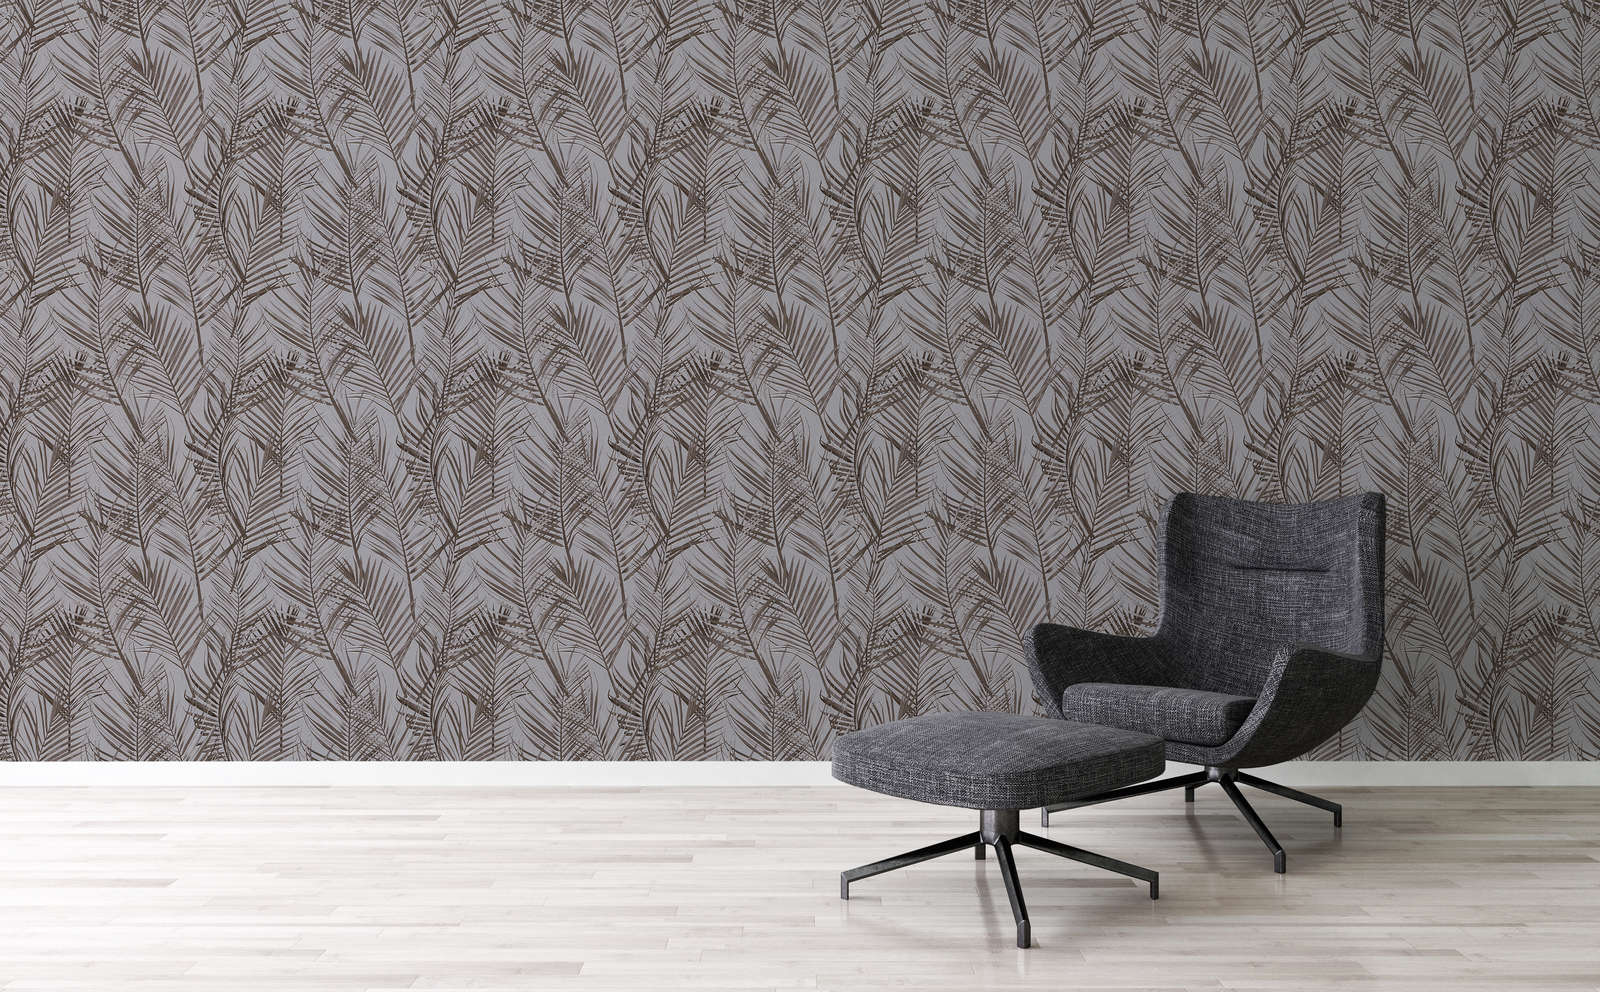             Floral wallpaper with palm pattern in matt - grey, brown
        